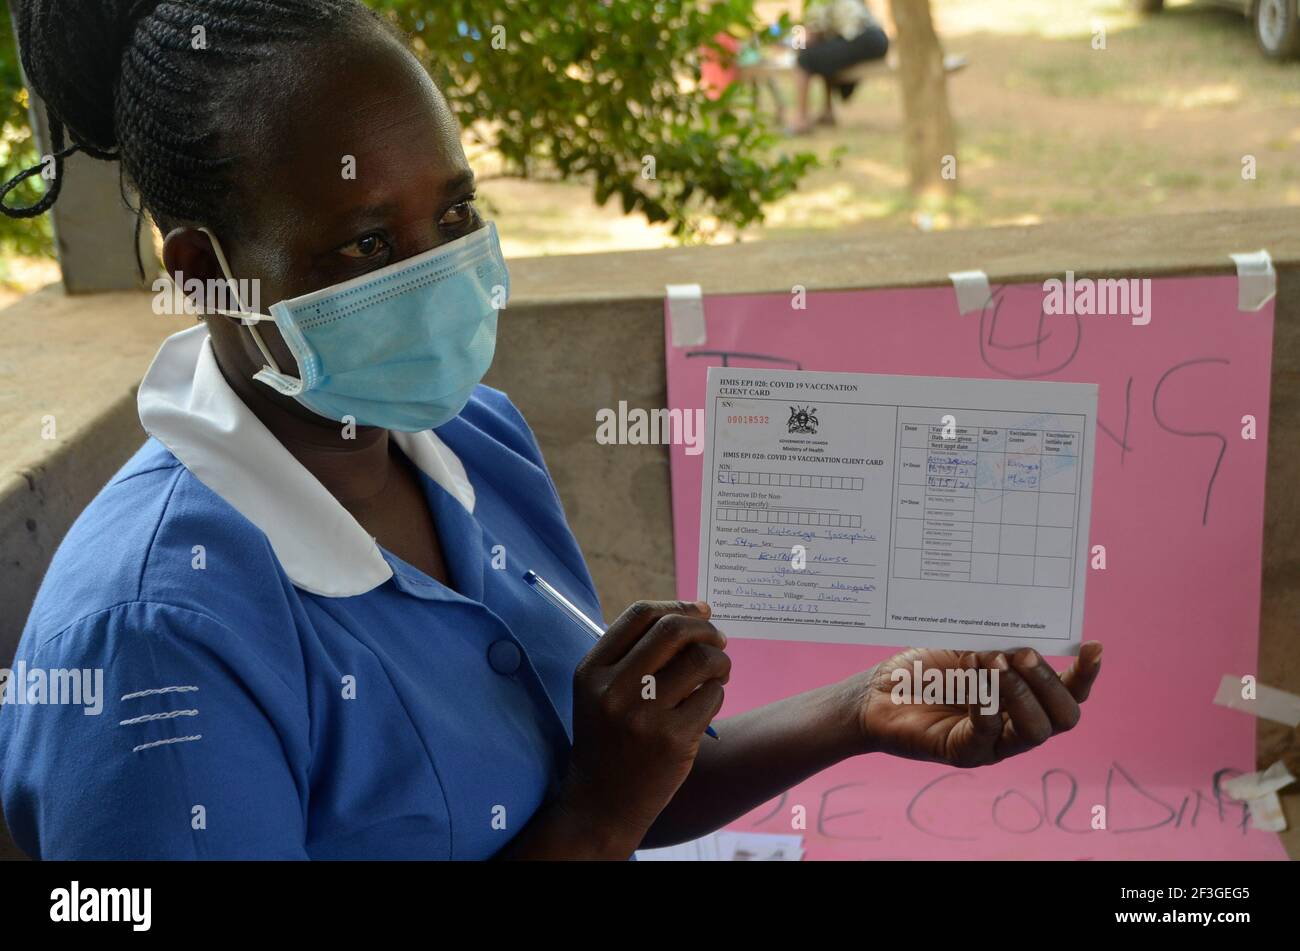 Wakiso, Uganda. 16th Mar, 2021. A medical worker shows COVID-19 vaccination card at Kasangati Health Center, Wakiso District, Central Region, Uganda, March 16, 2021. Uganda on March 10 rolled out a coronavirus vaccination exercise in phases after the country receives the first shipment of the AstraZeneca vaccines on March 5. Credit: Nicholas Kajoba/Xinhua/Alamy Live News Stock Photo